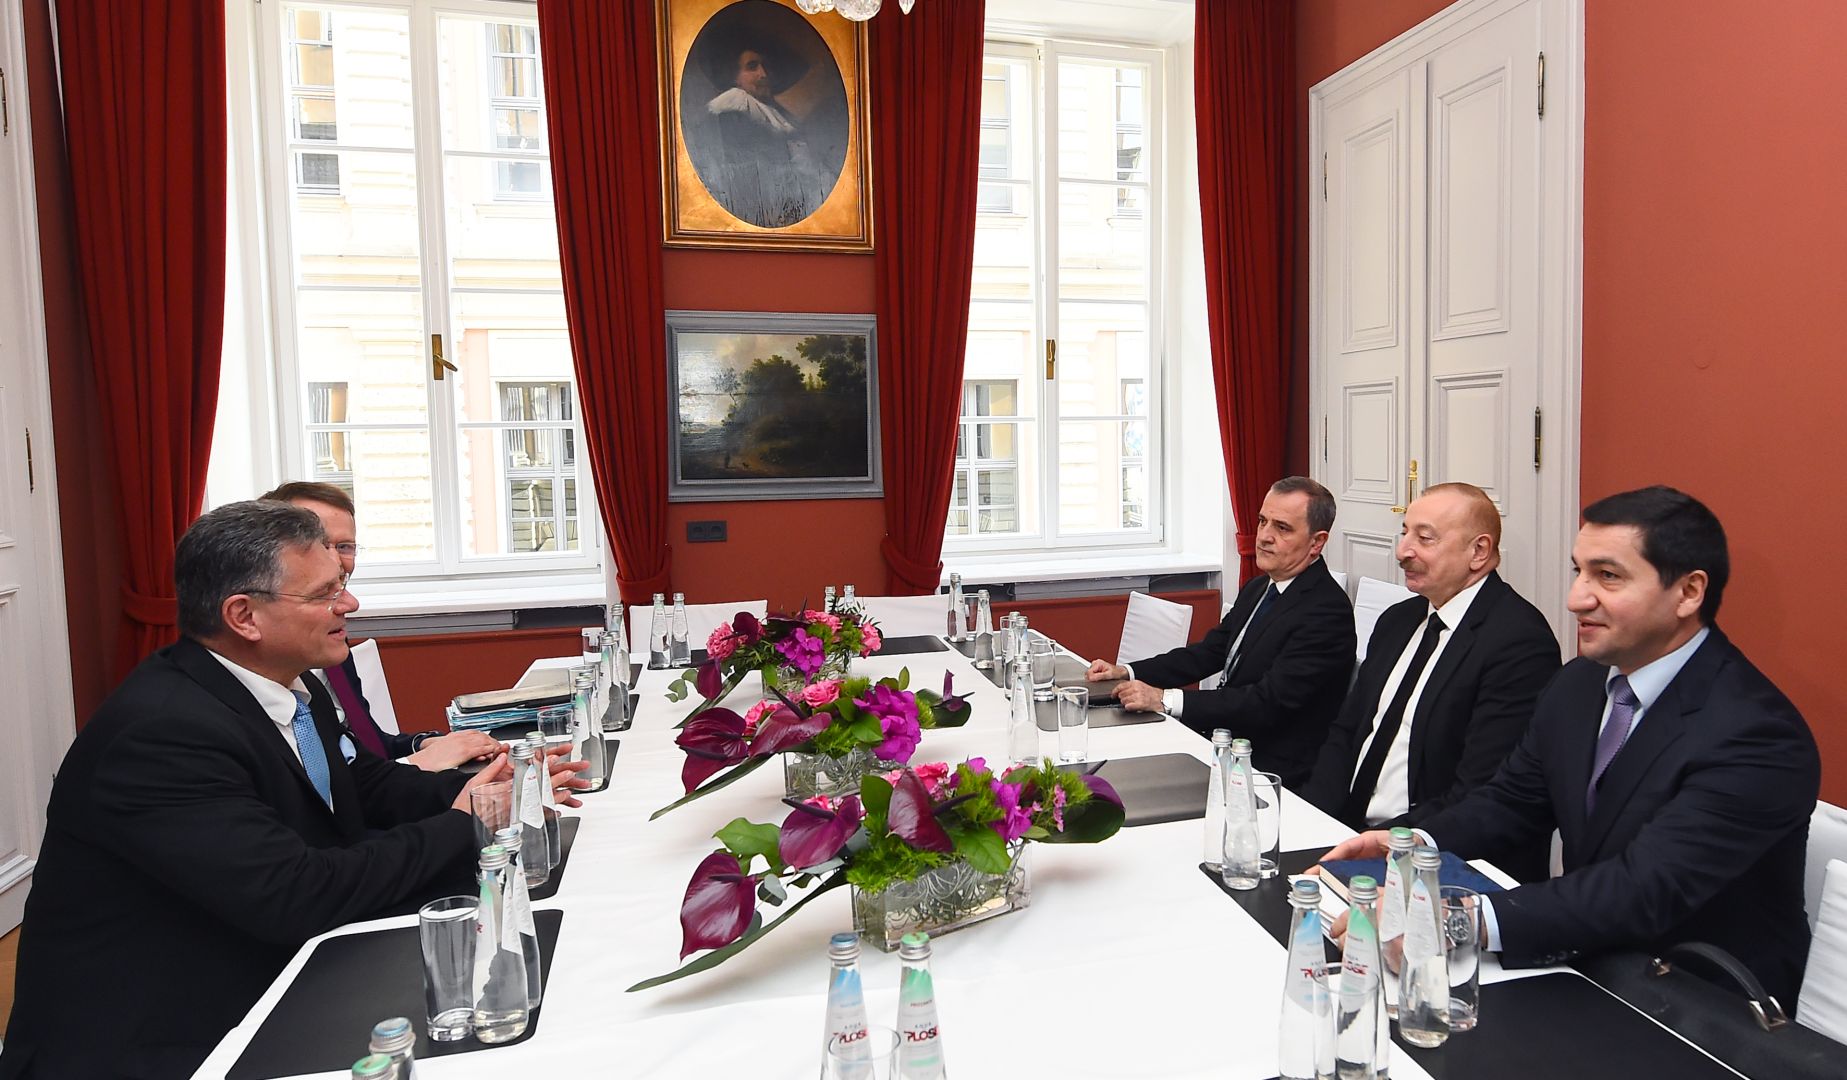 President of Azerbaijan meets with European Commission Executive Vice-President in Munich [PHOTOS]